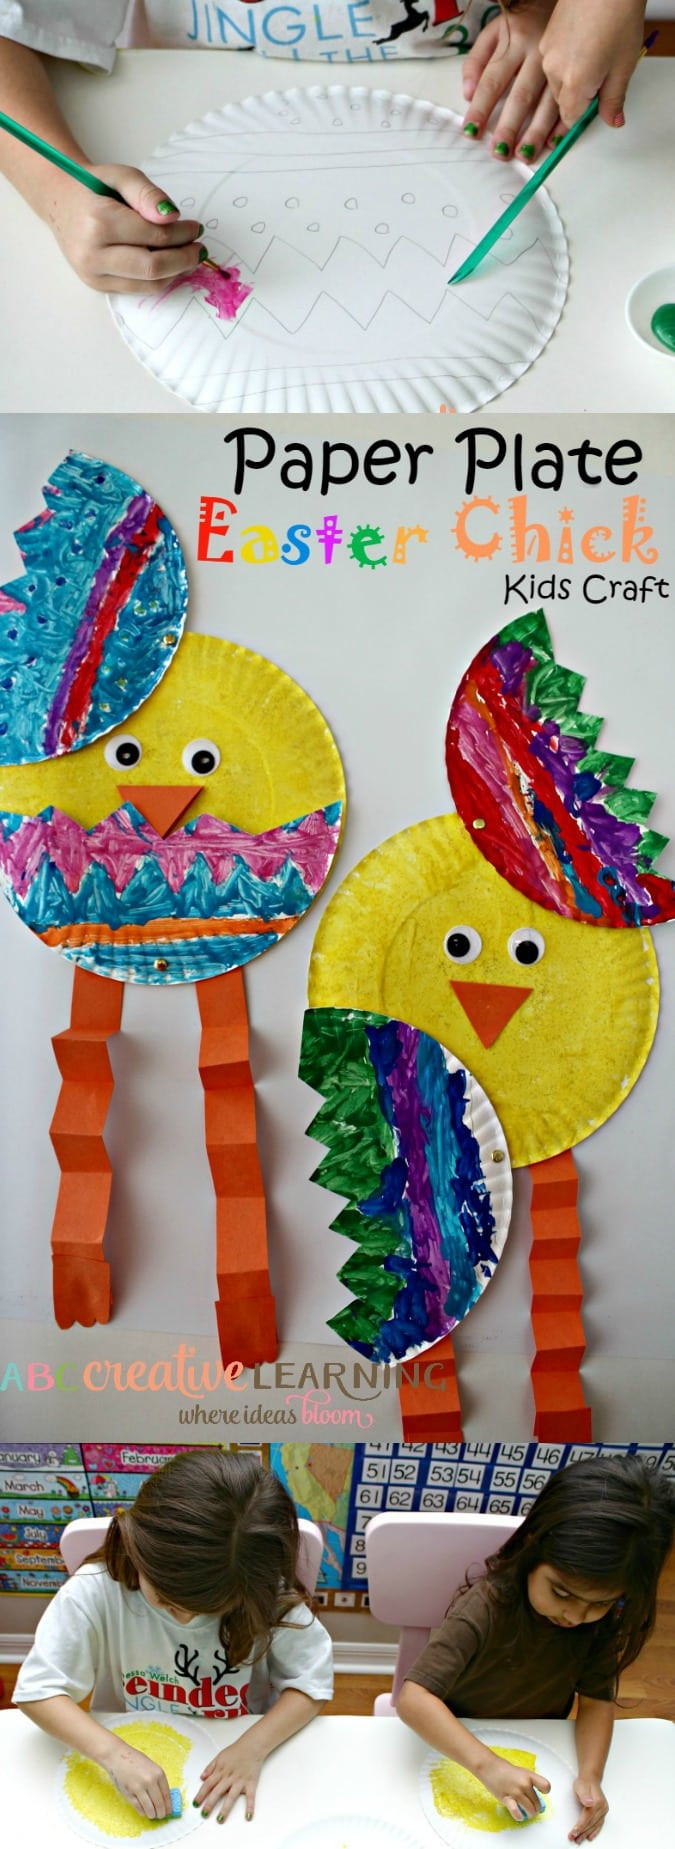 Paper Plate Easter Crafts
 Cutest Paper Plate Easter Chick Kids Craft